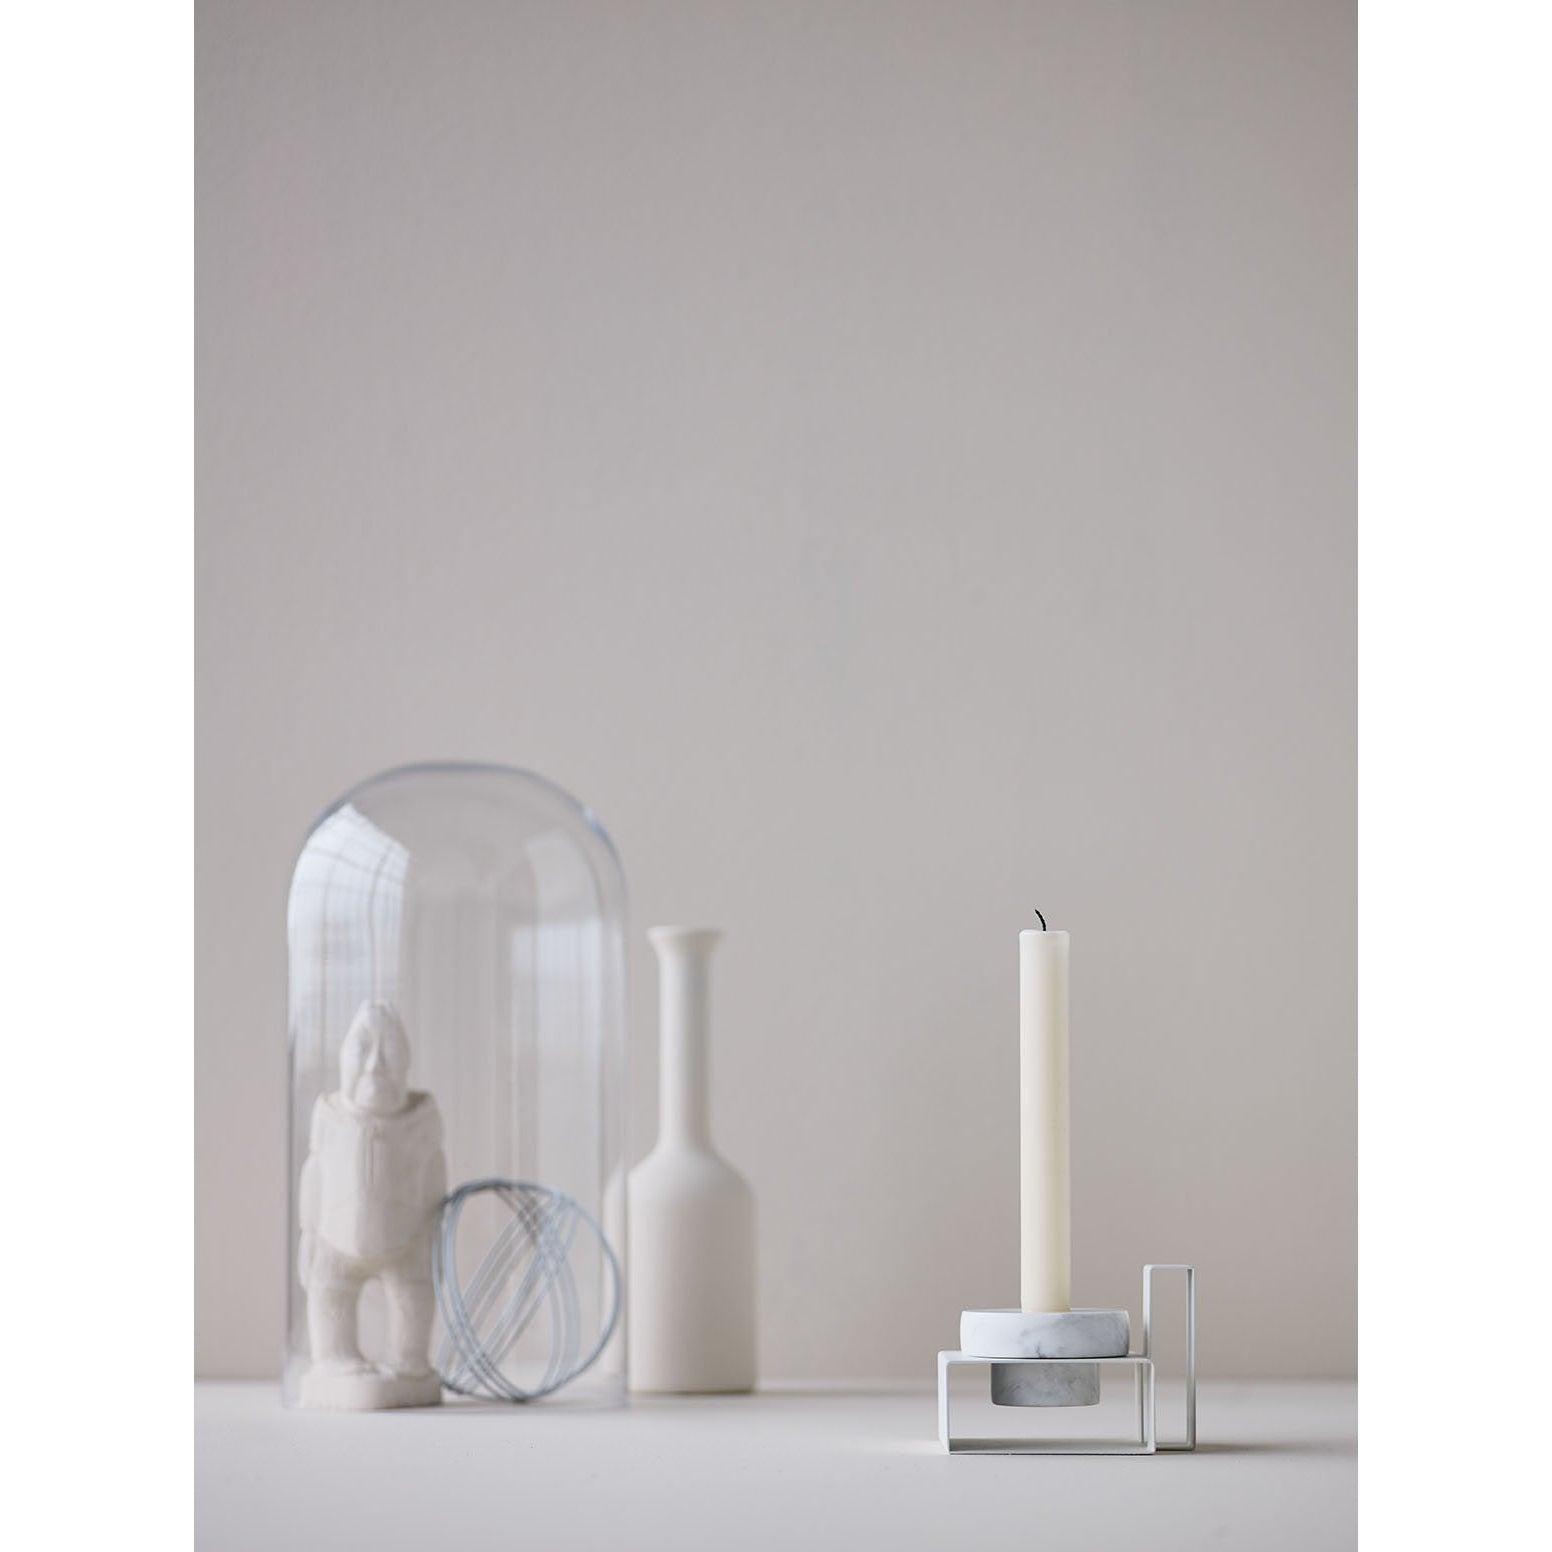 Lucie Kaas Marco Candlestick Black，8厘米